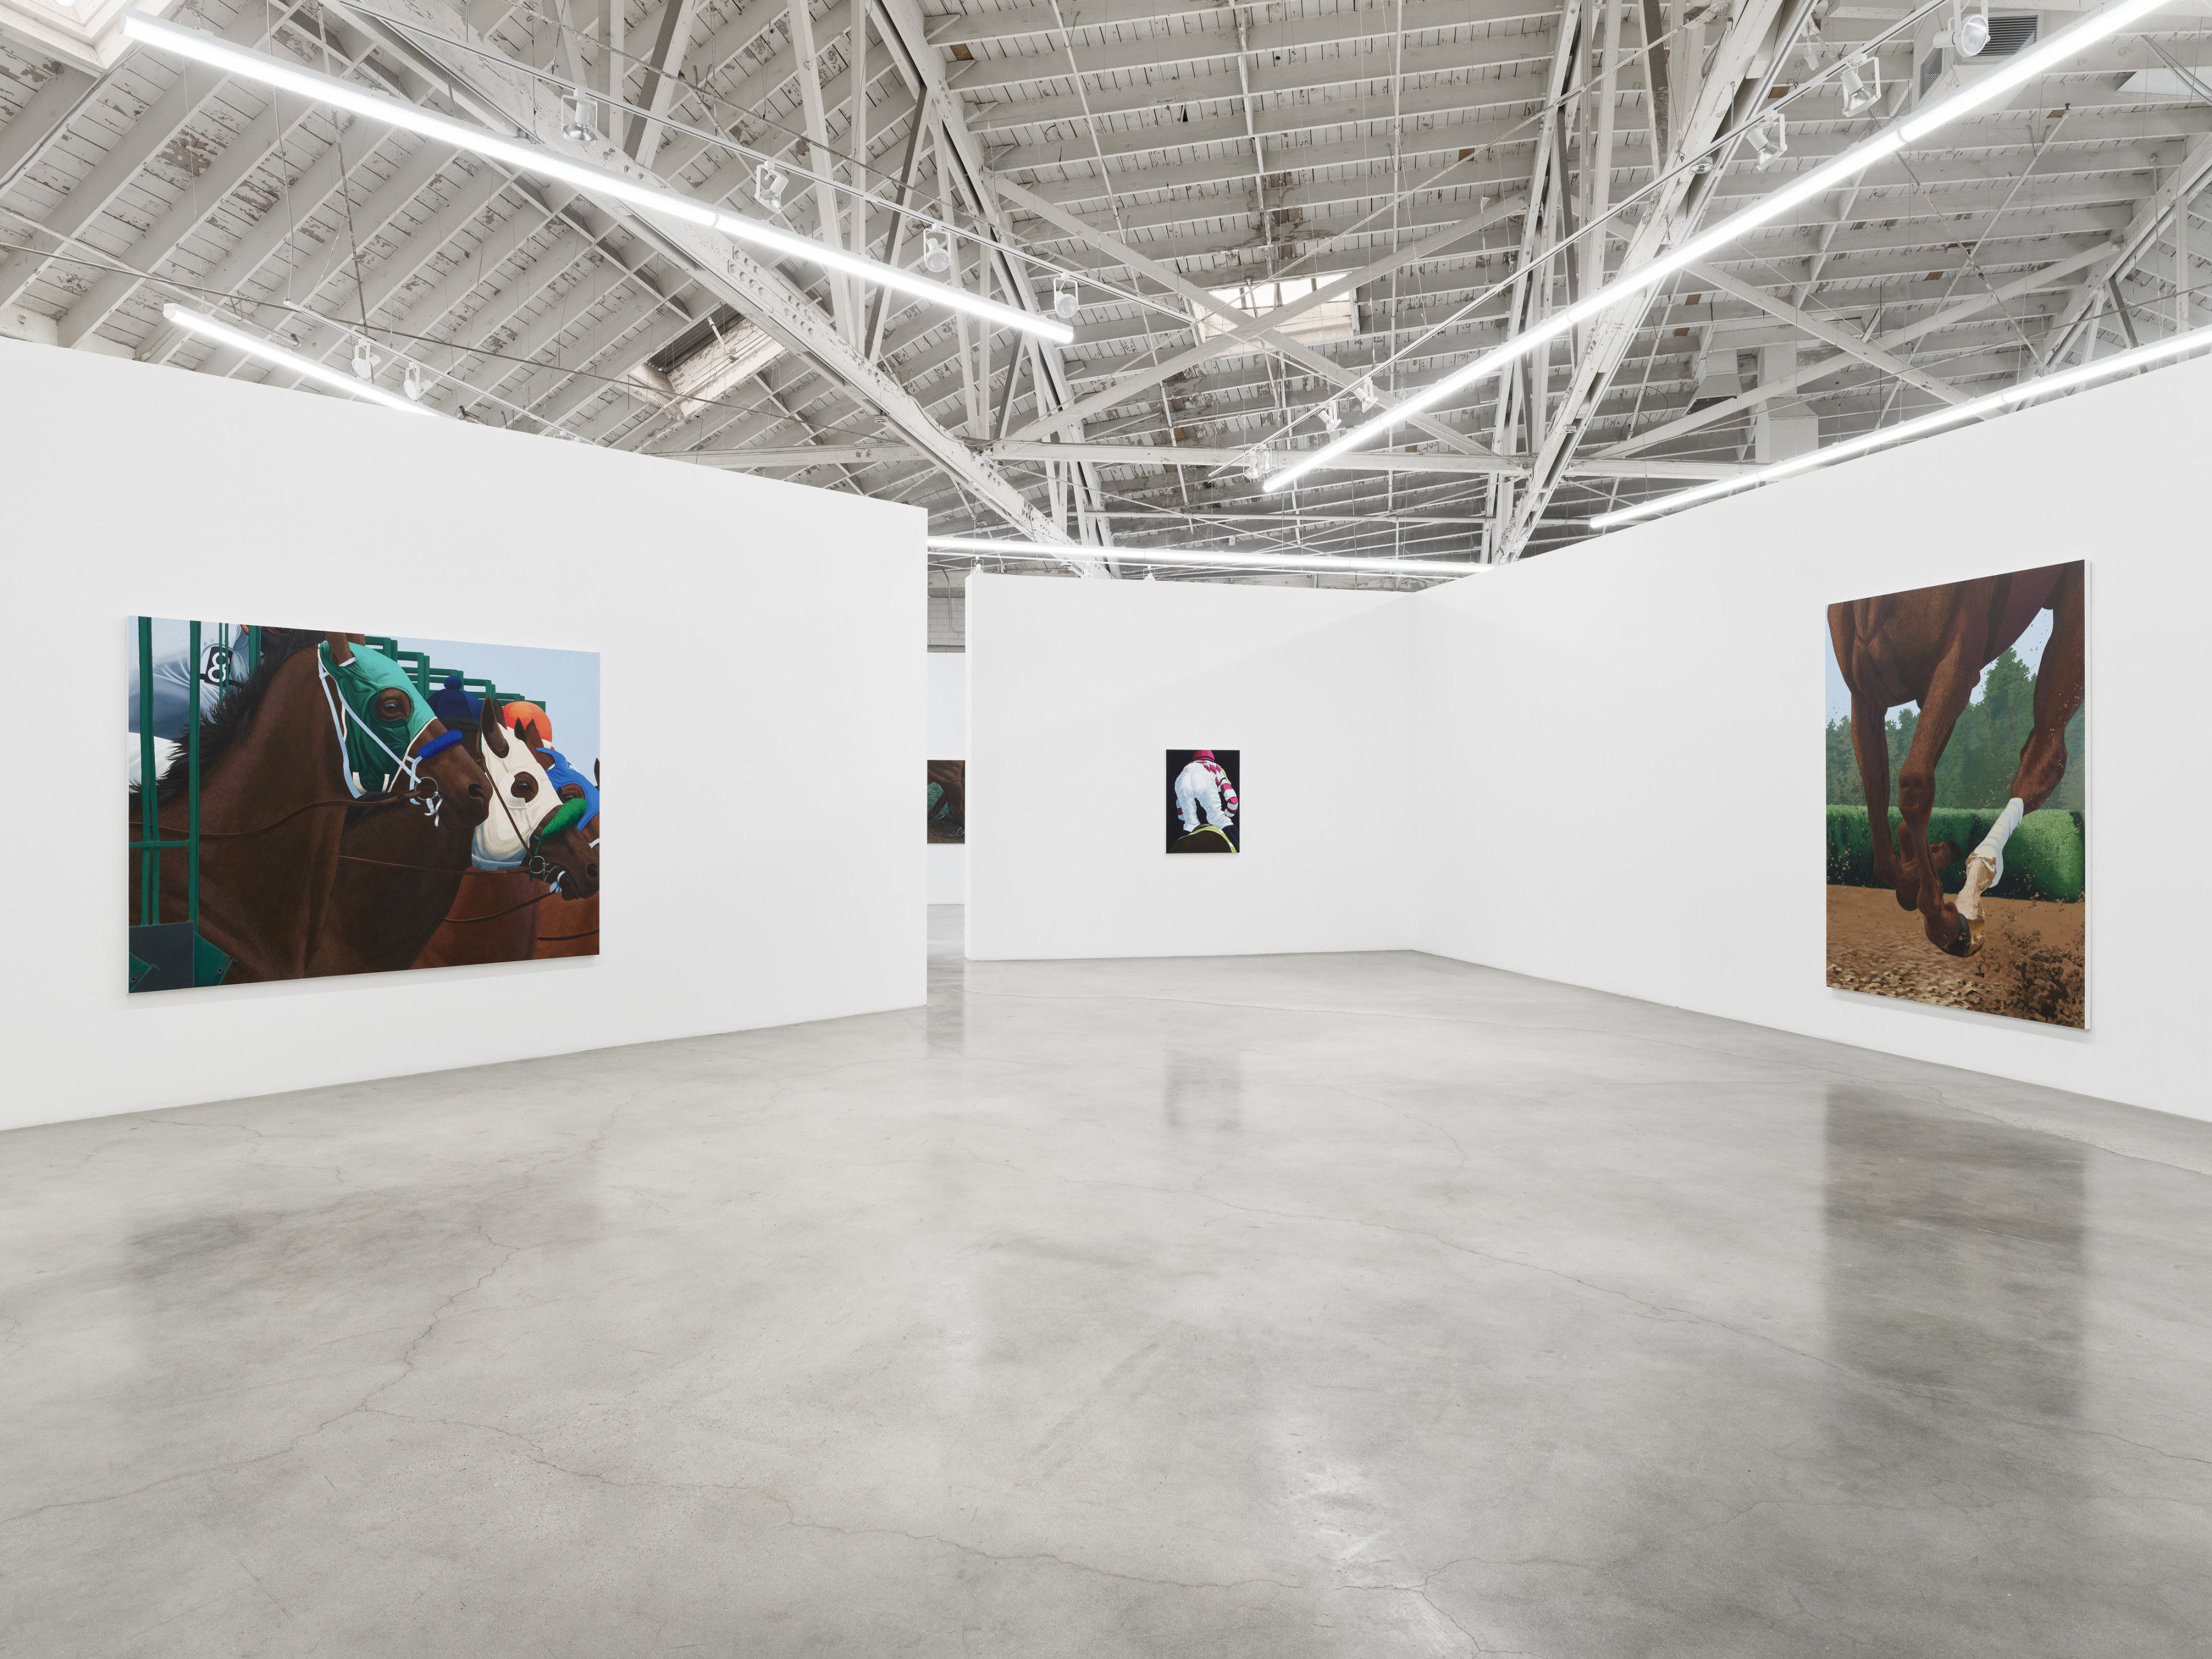 Installation image of Sarah Miska's "High Stakes" at Night Gallery, Los Angeles. 